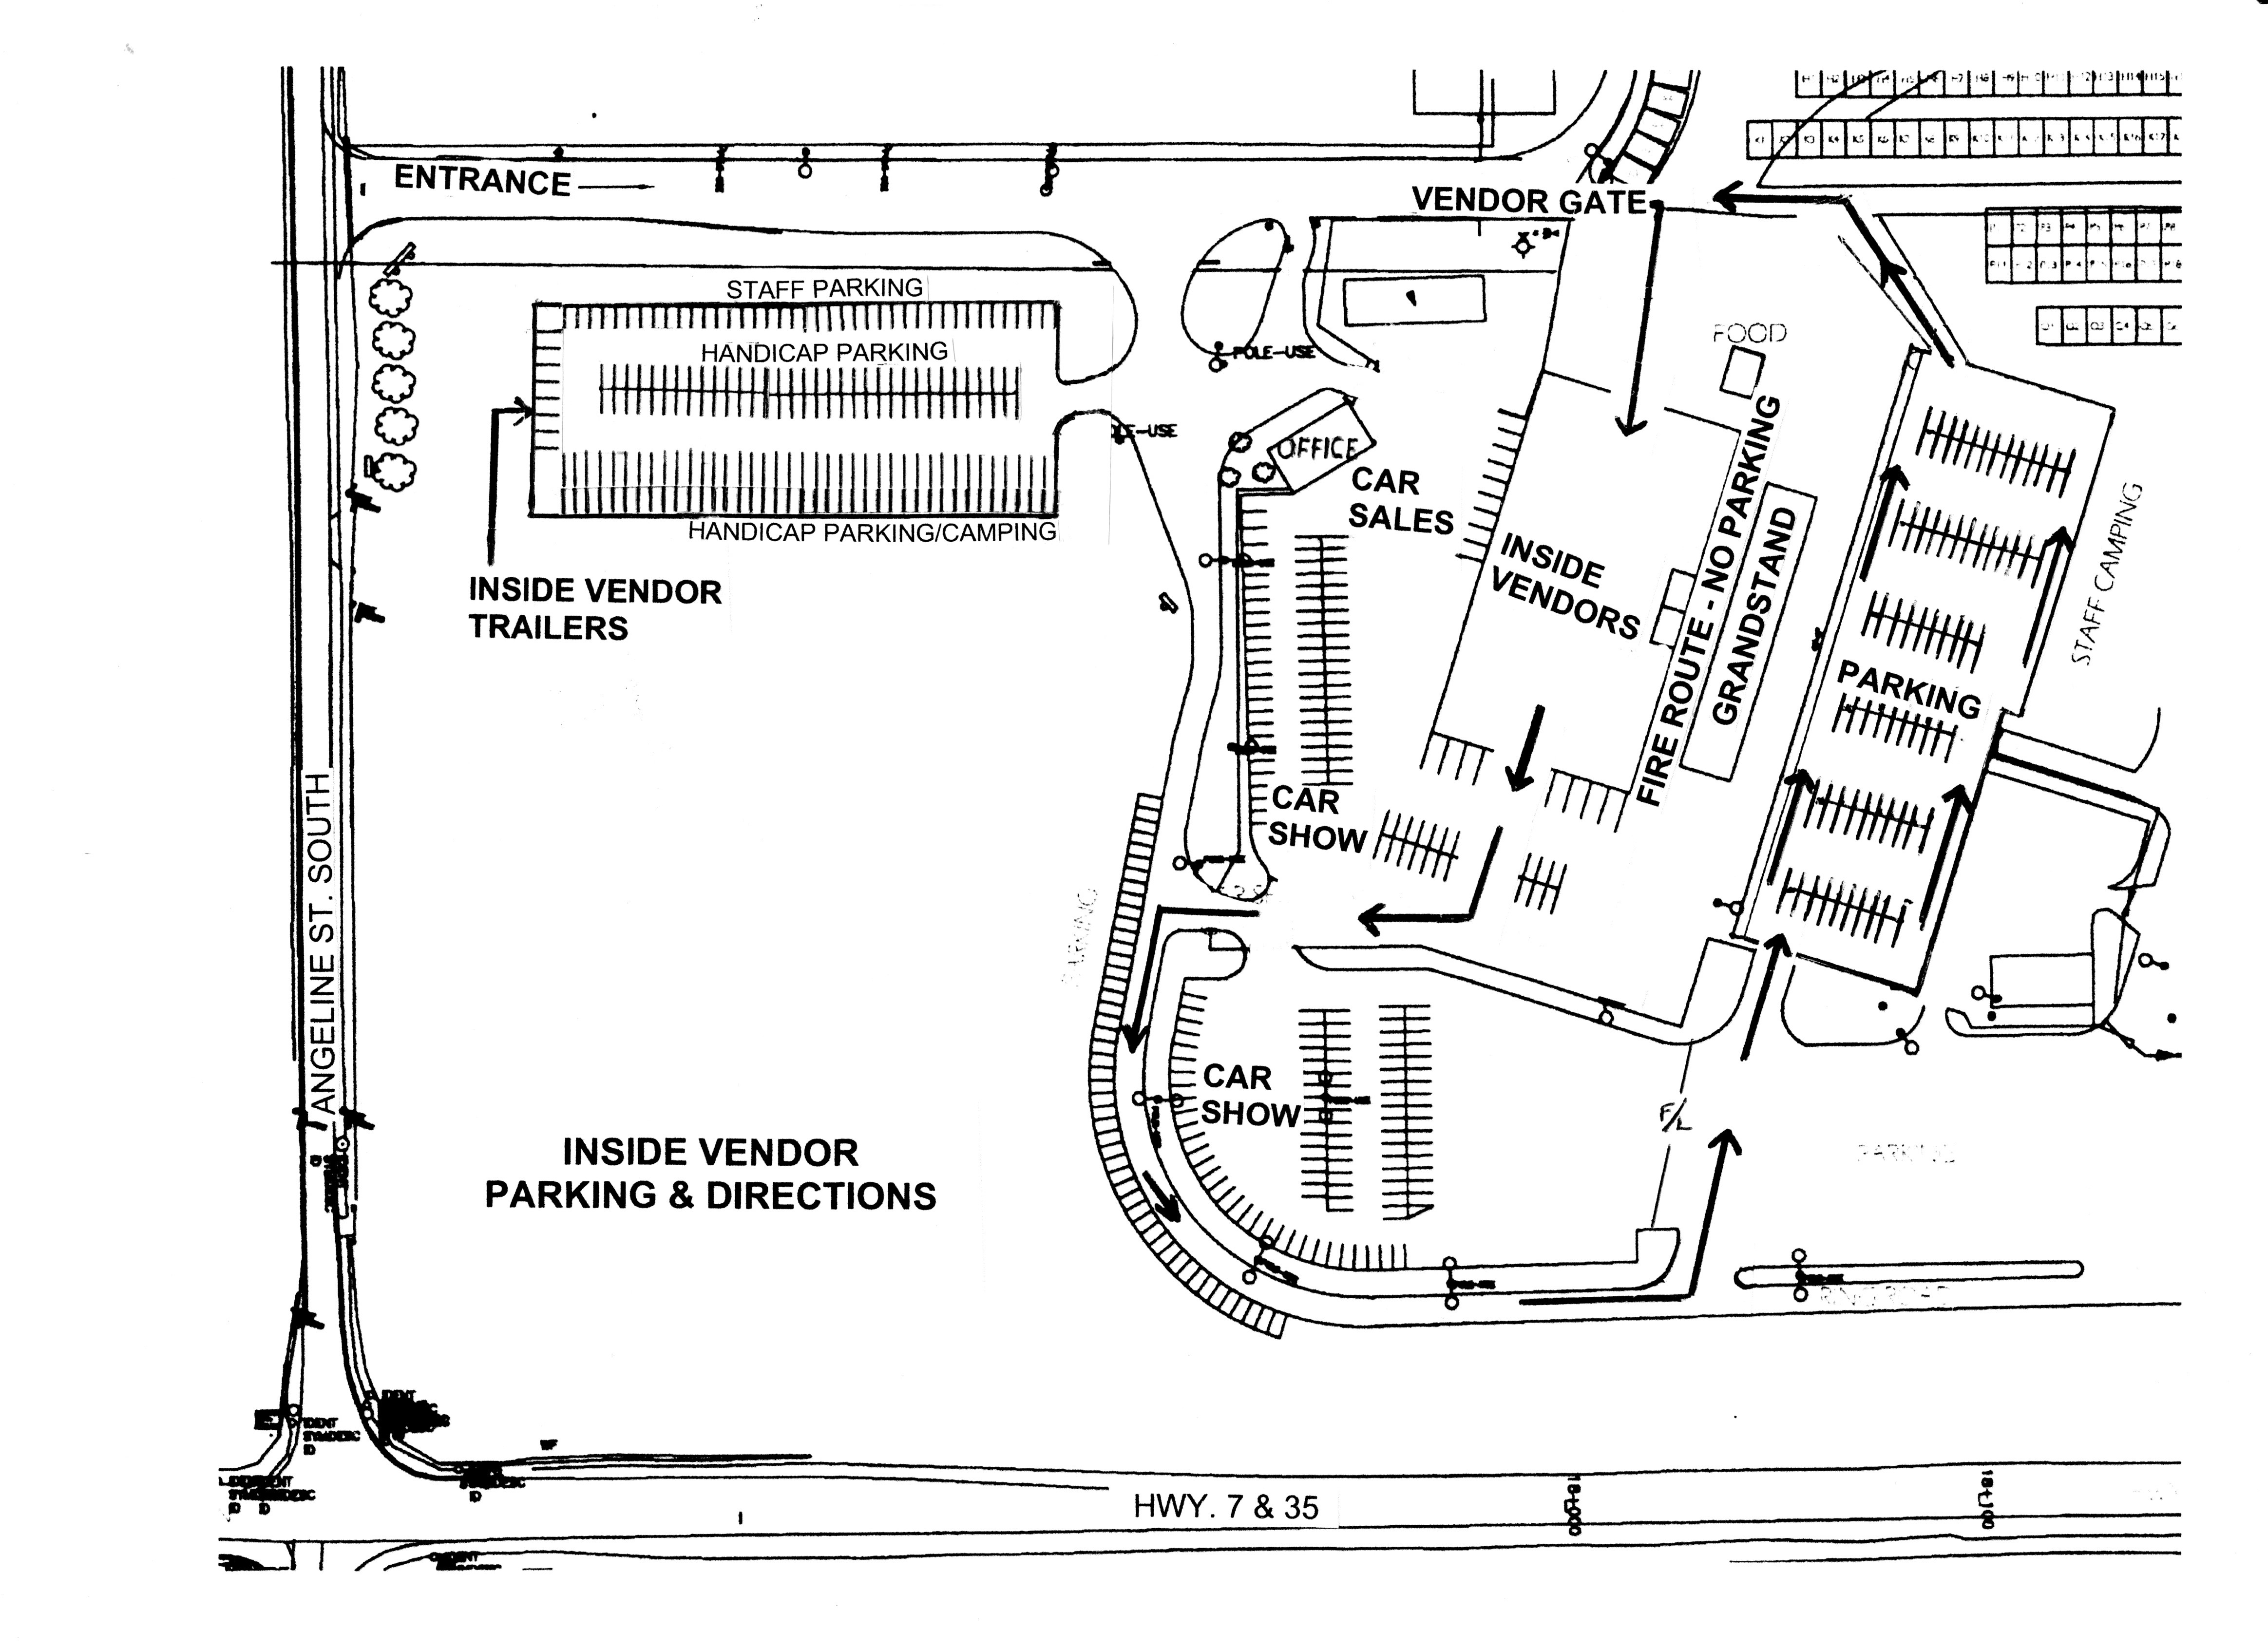 2022 Inside Vendor Parking and Directions